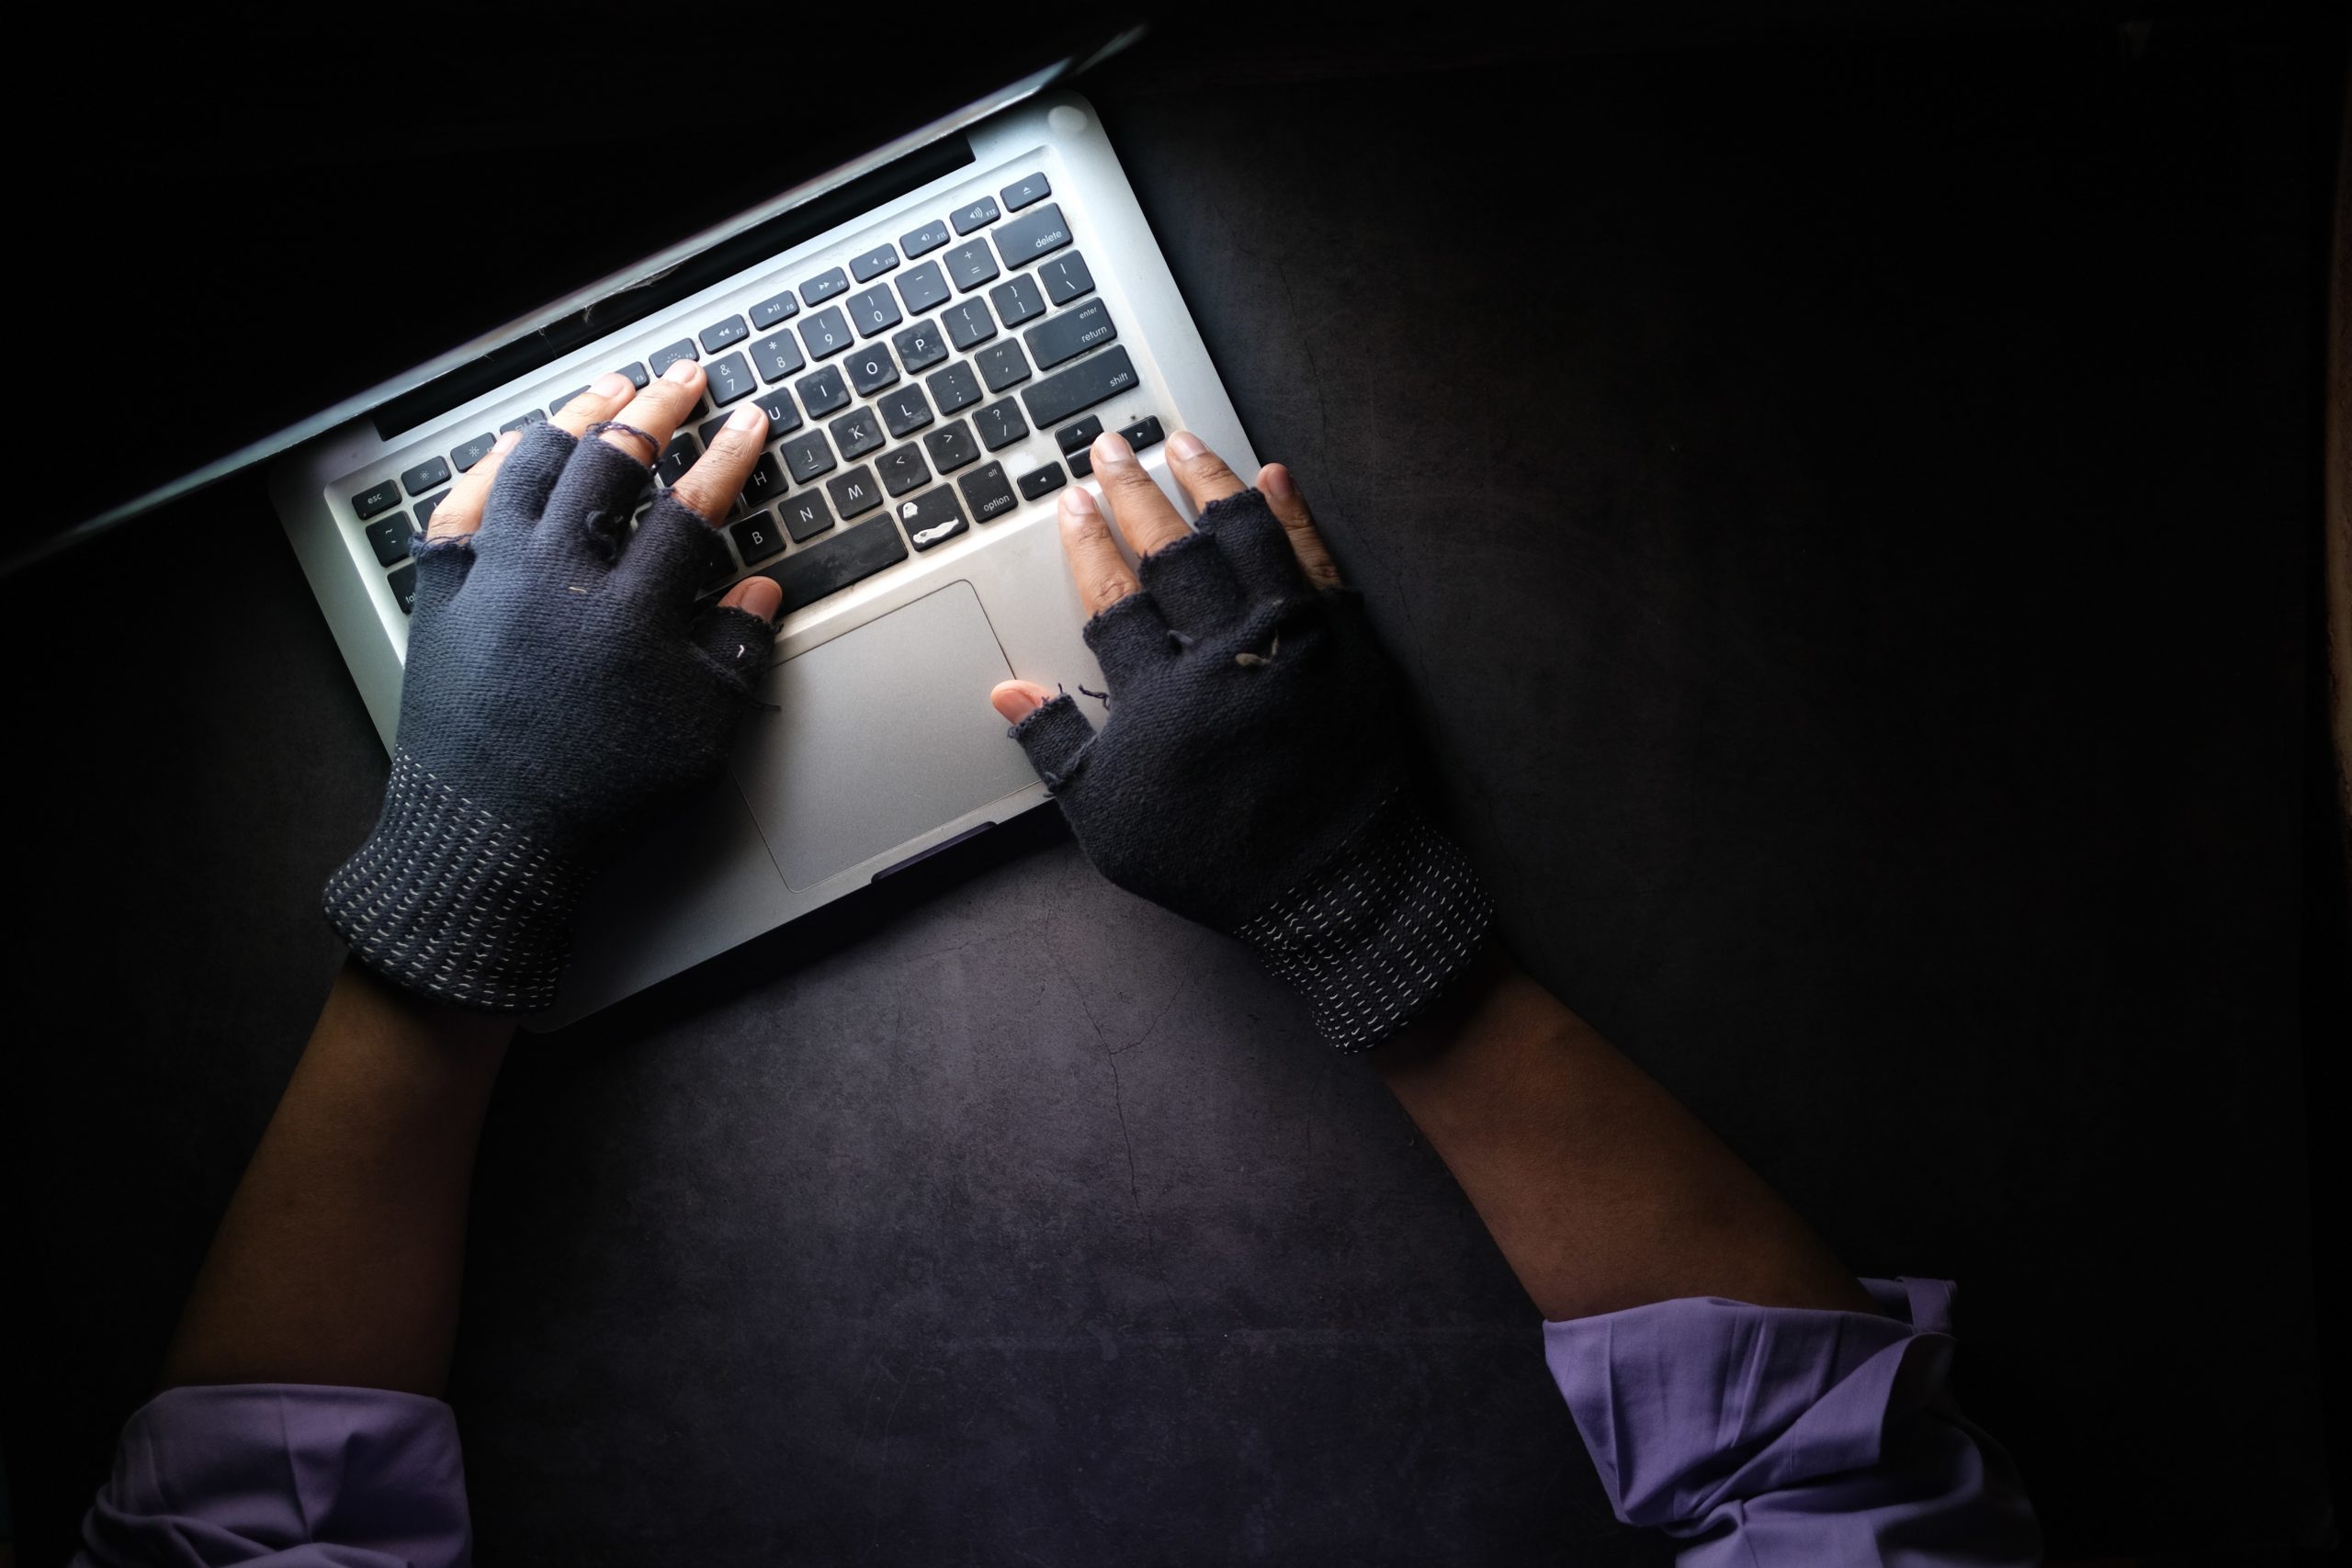 Aerial view of hands with fingerless gloves on Macbook in the dark